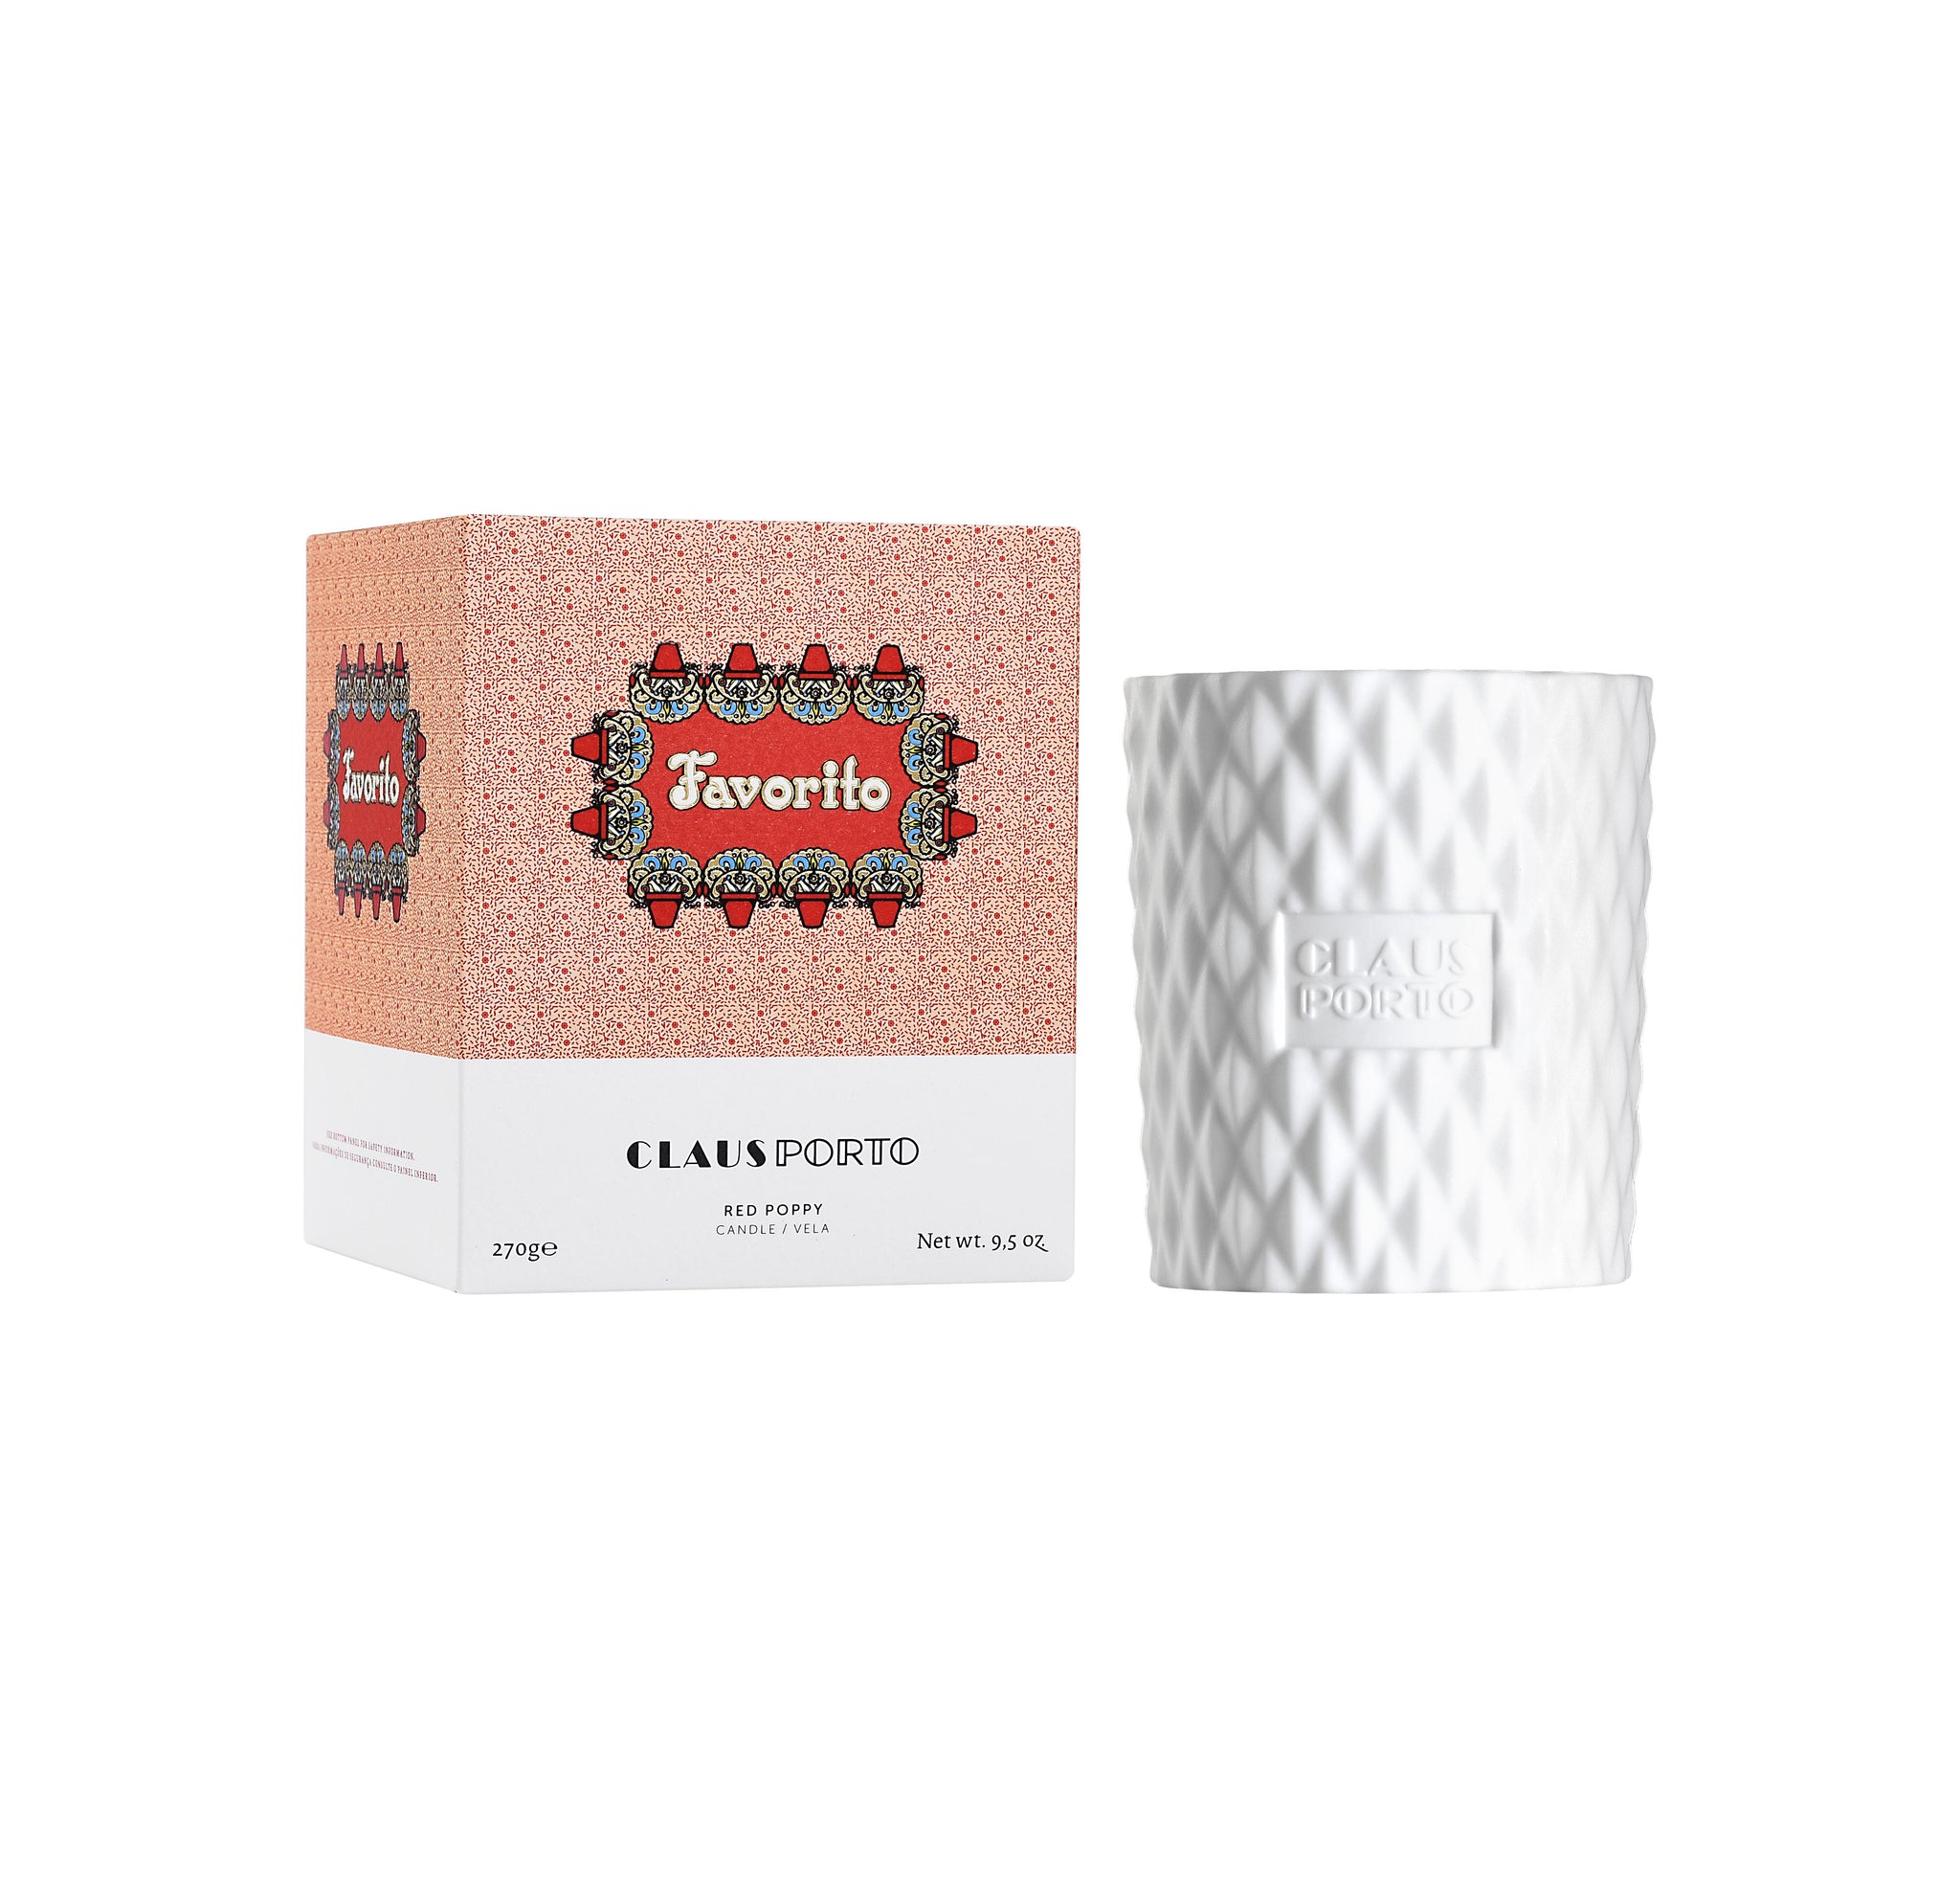 CLAUS PORTO FAVORITO CANDLE 270g BY CLAUS PORTO - MeMeMe Gifts